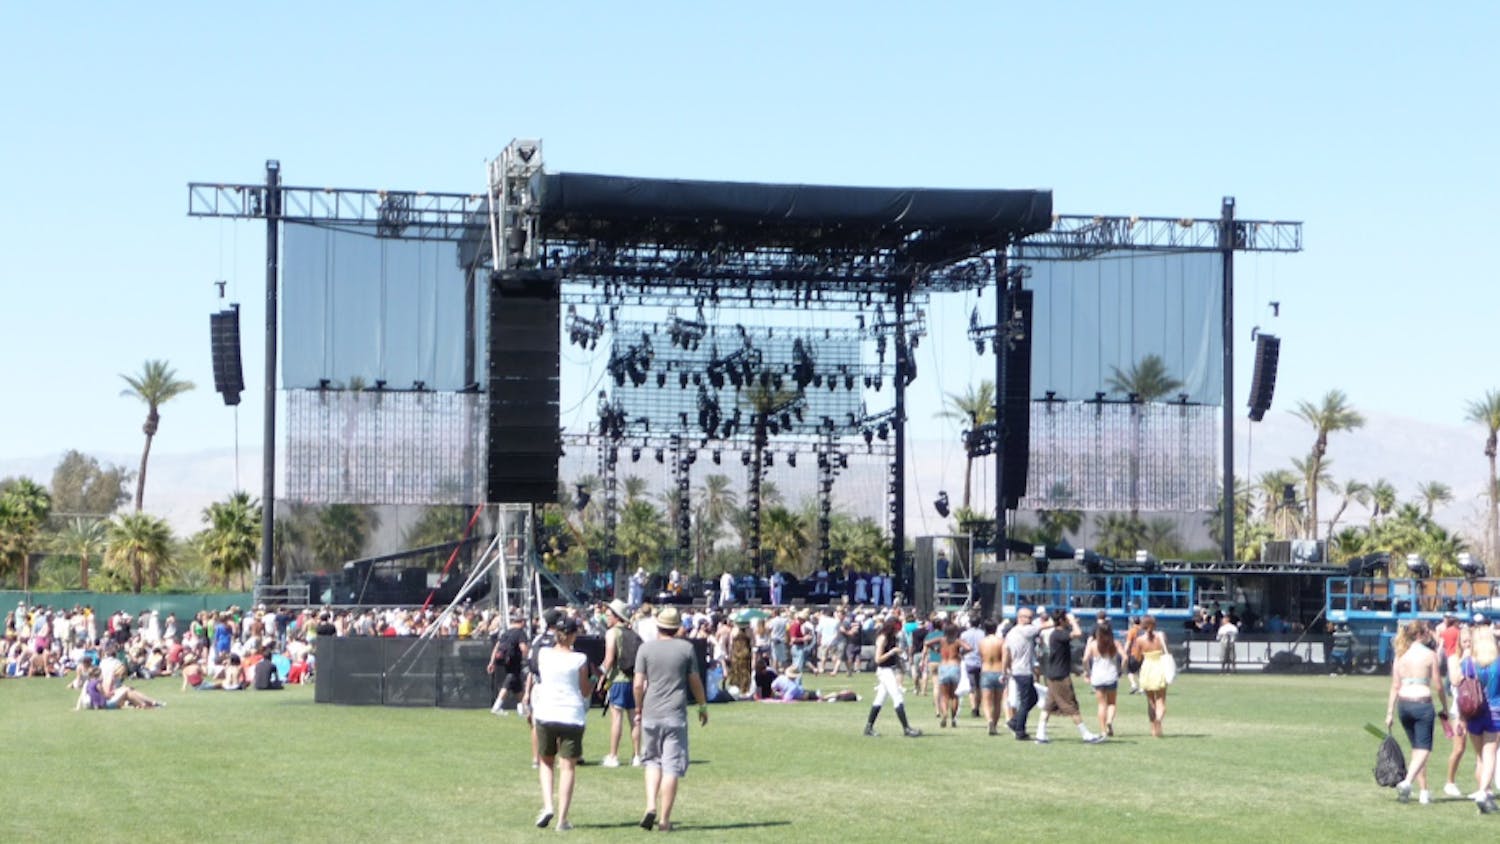 Coachella is a big-time music festival held once a year usually at the Empire Polo Club in Indio, California (Photo courtesy of Flickr / by Fred Von Lohmann / April 19, 2009). 